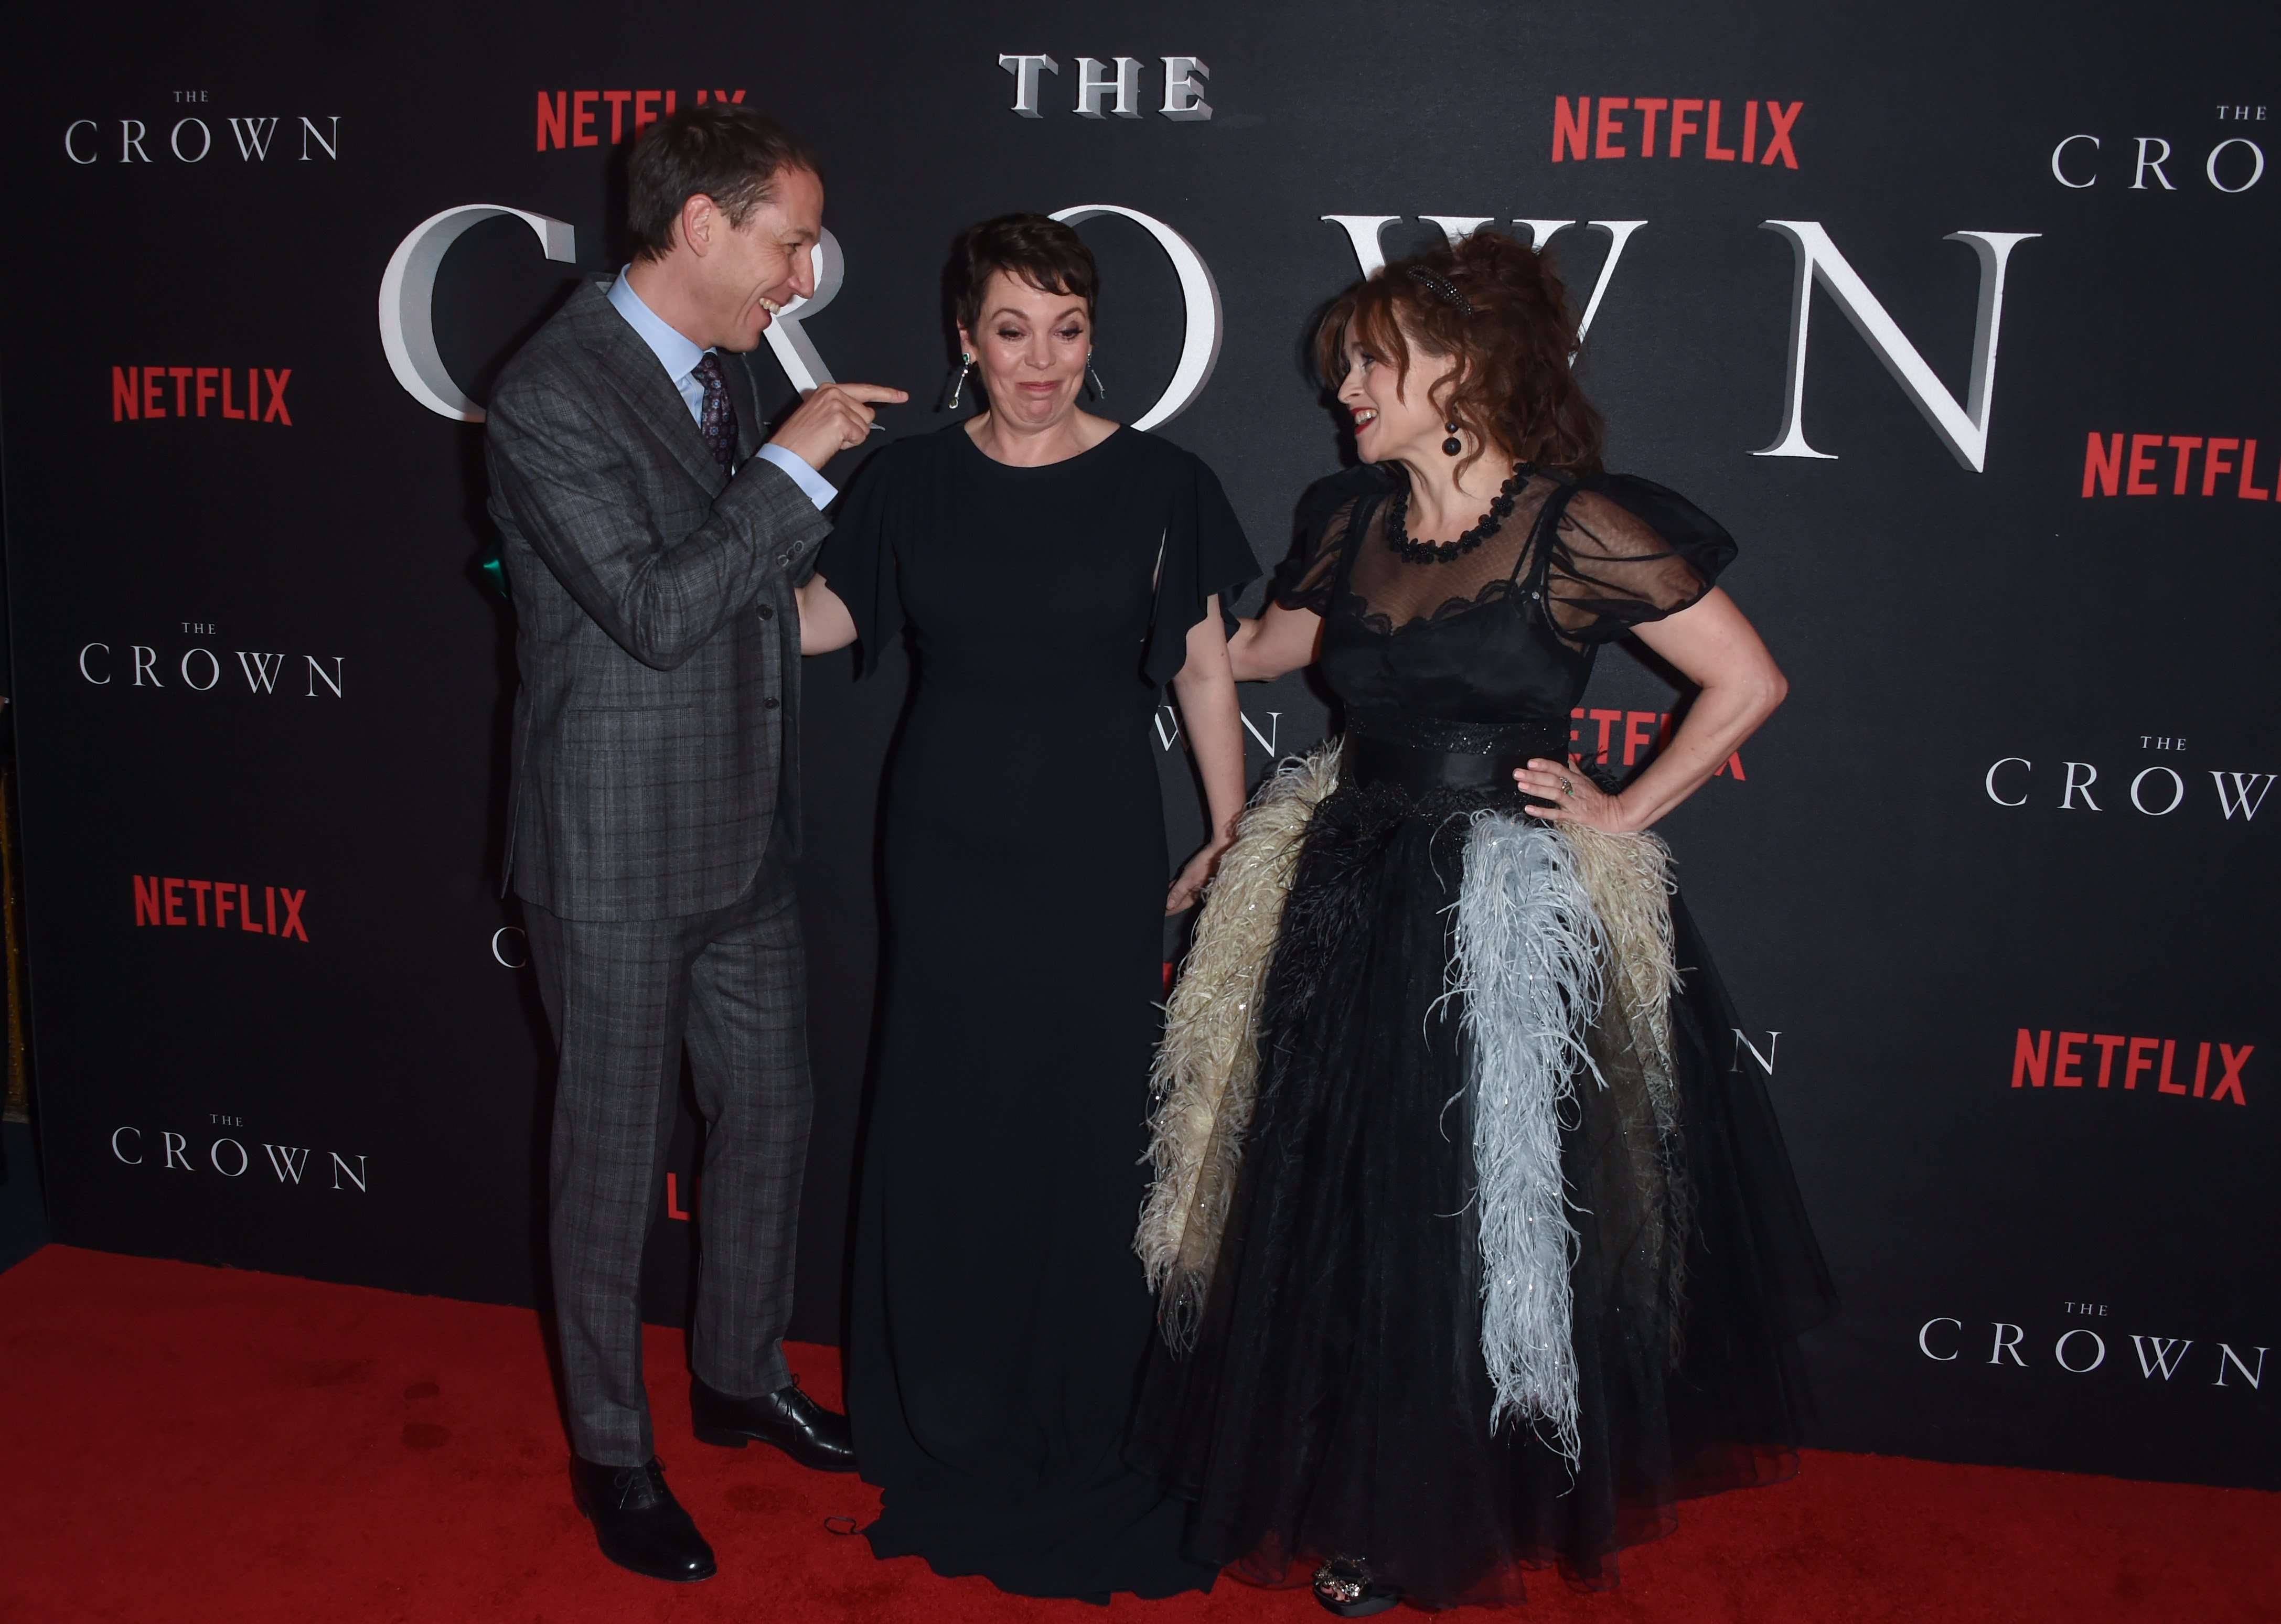 Tobias Menzies, Olivia Colman and Helena Bonham Carter laughing on red carpet at world premiere of The Crown